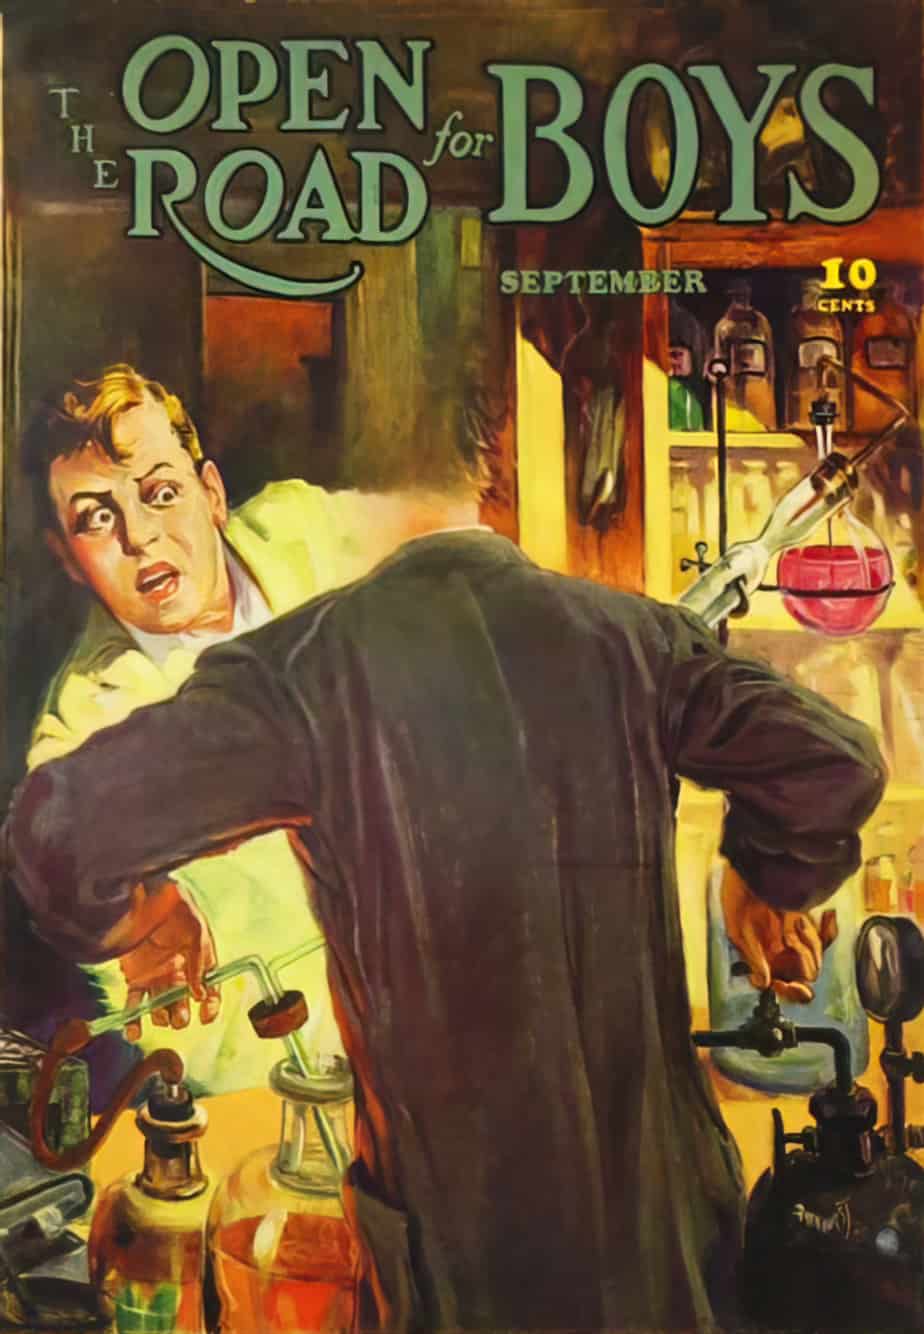 The Open Road For Boys Magazine The Cloak of Darkness Adventures Amid Chemical Mysteries